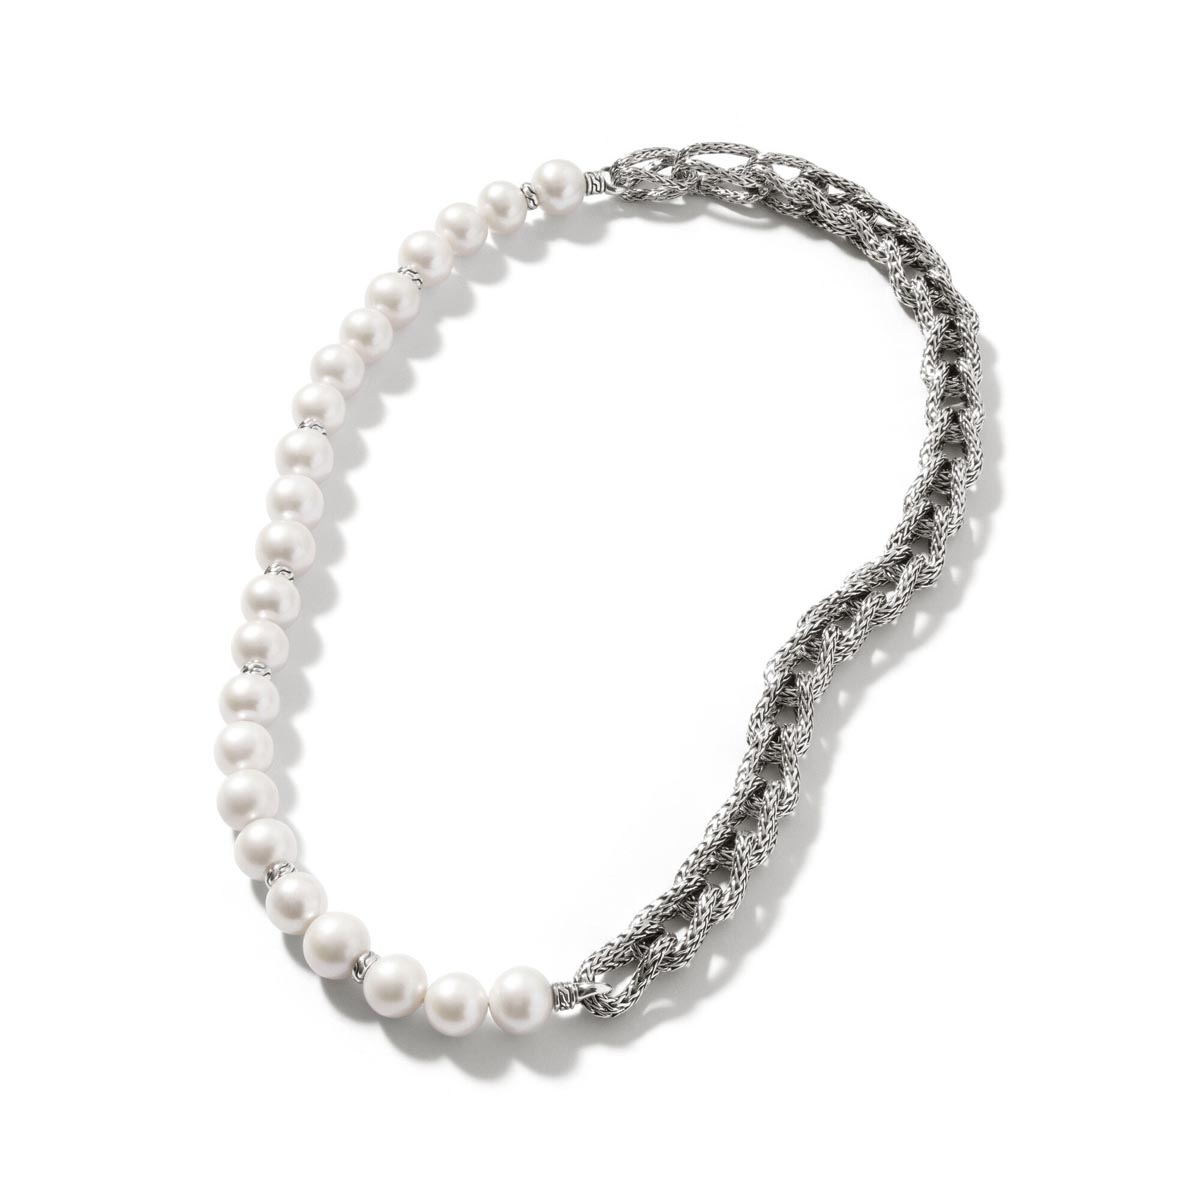 John Hardy Classic Chain Collection Asli Cultured Freshwater Pearl Necklace in Sterling Silver (9.5mm pearls)